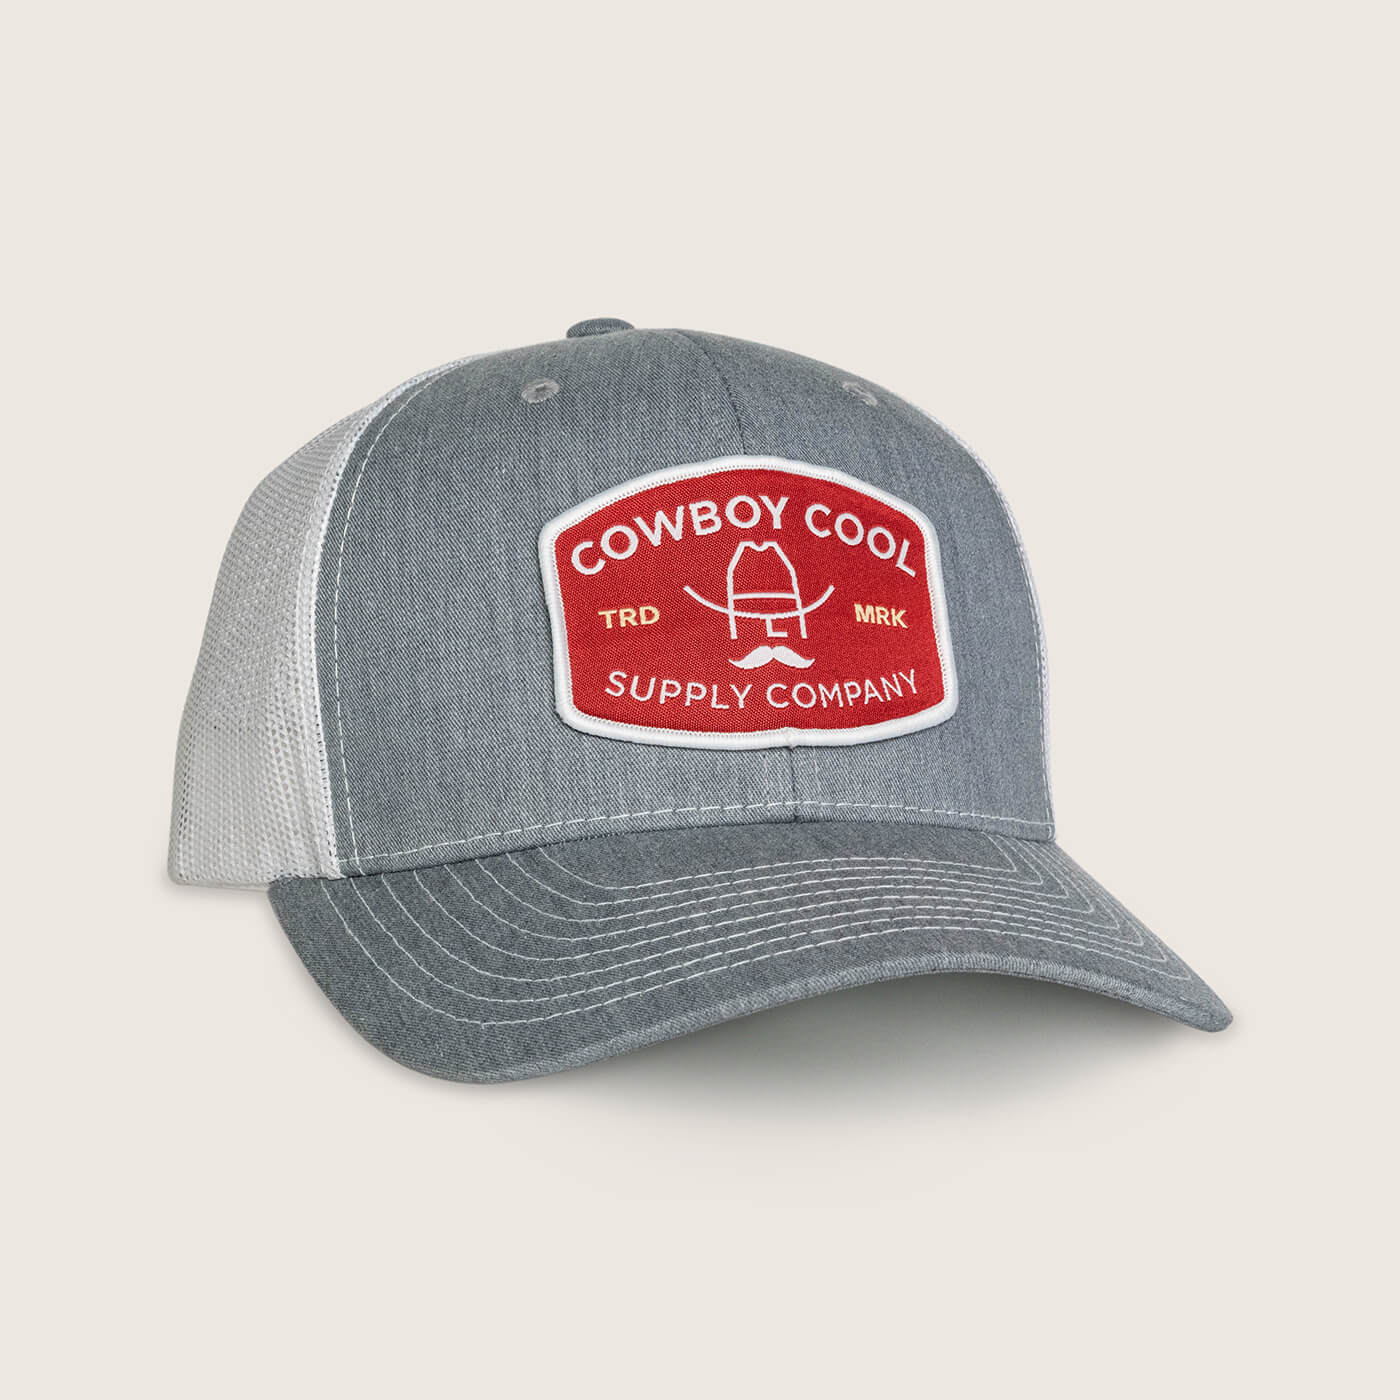 The Buckle Hat in Grey